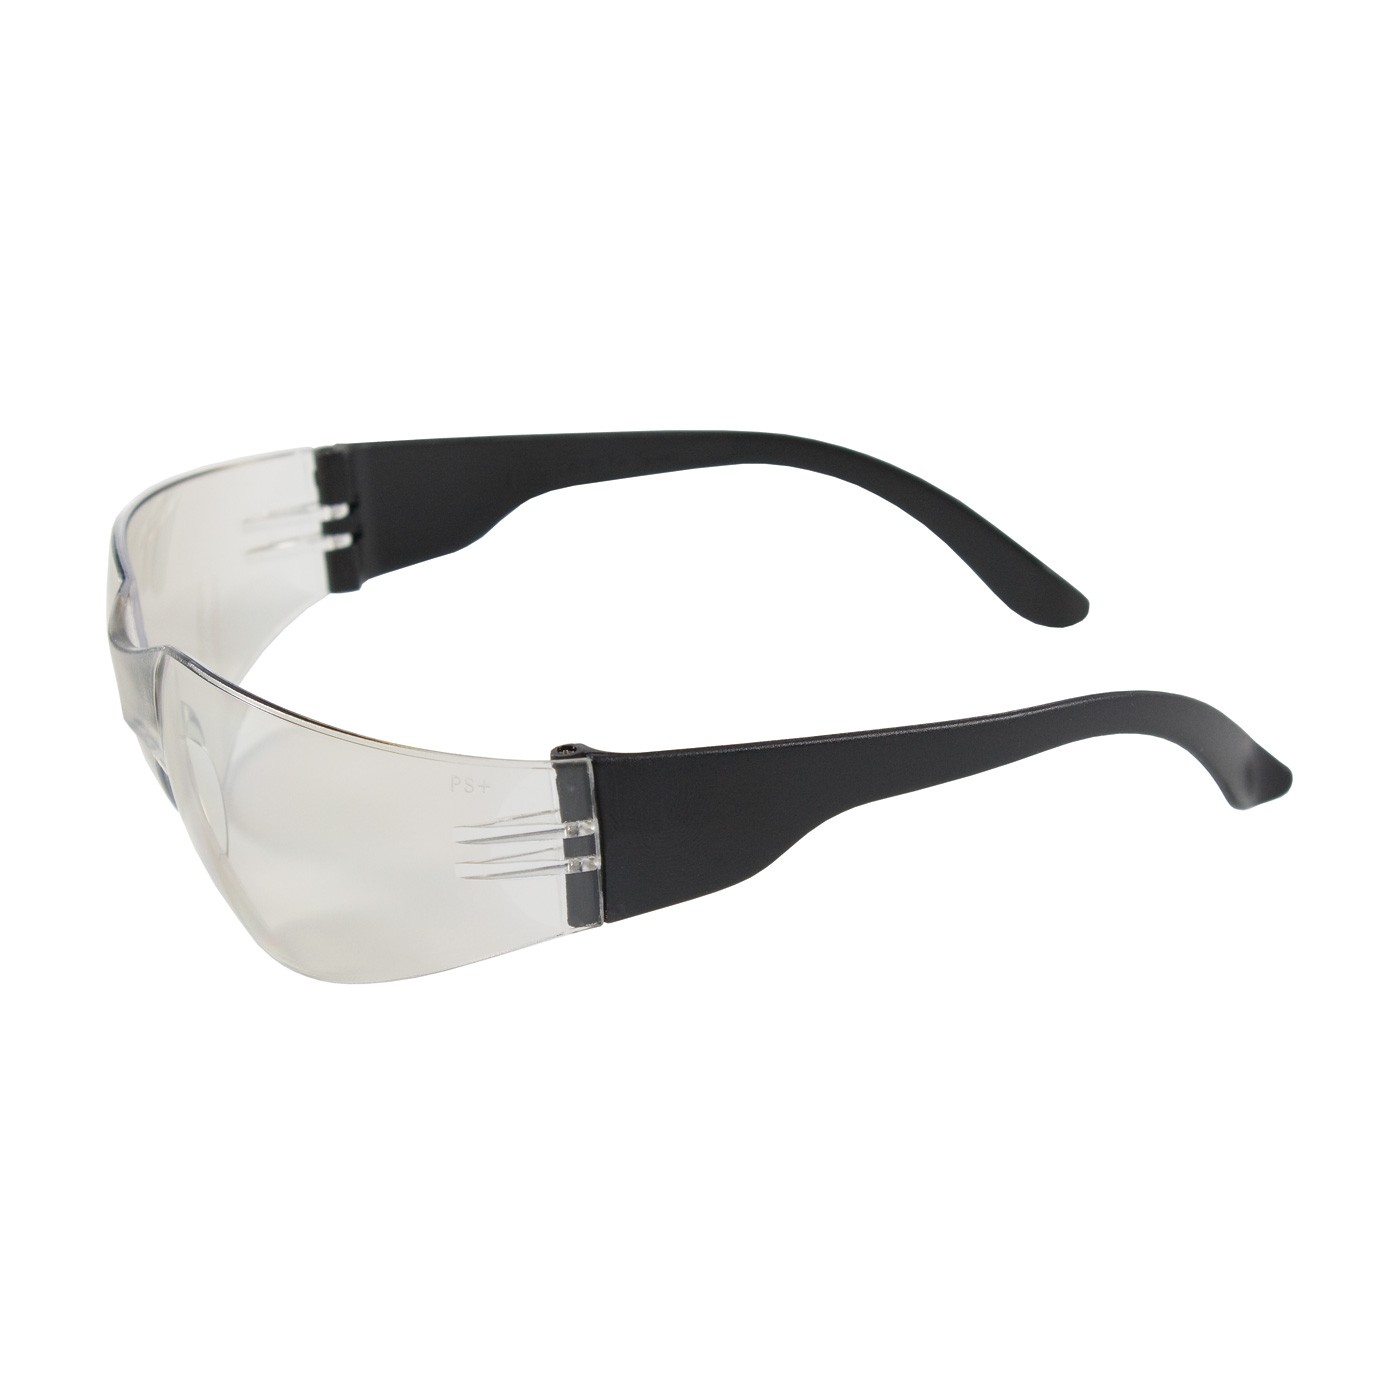  Zenon Z12™ Rimless Safety Glasses with Black Temple, I/O Lens and Anti-Scratch Coating  (#250-01-0002)